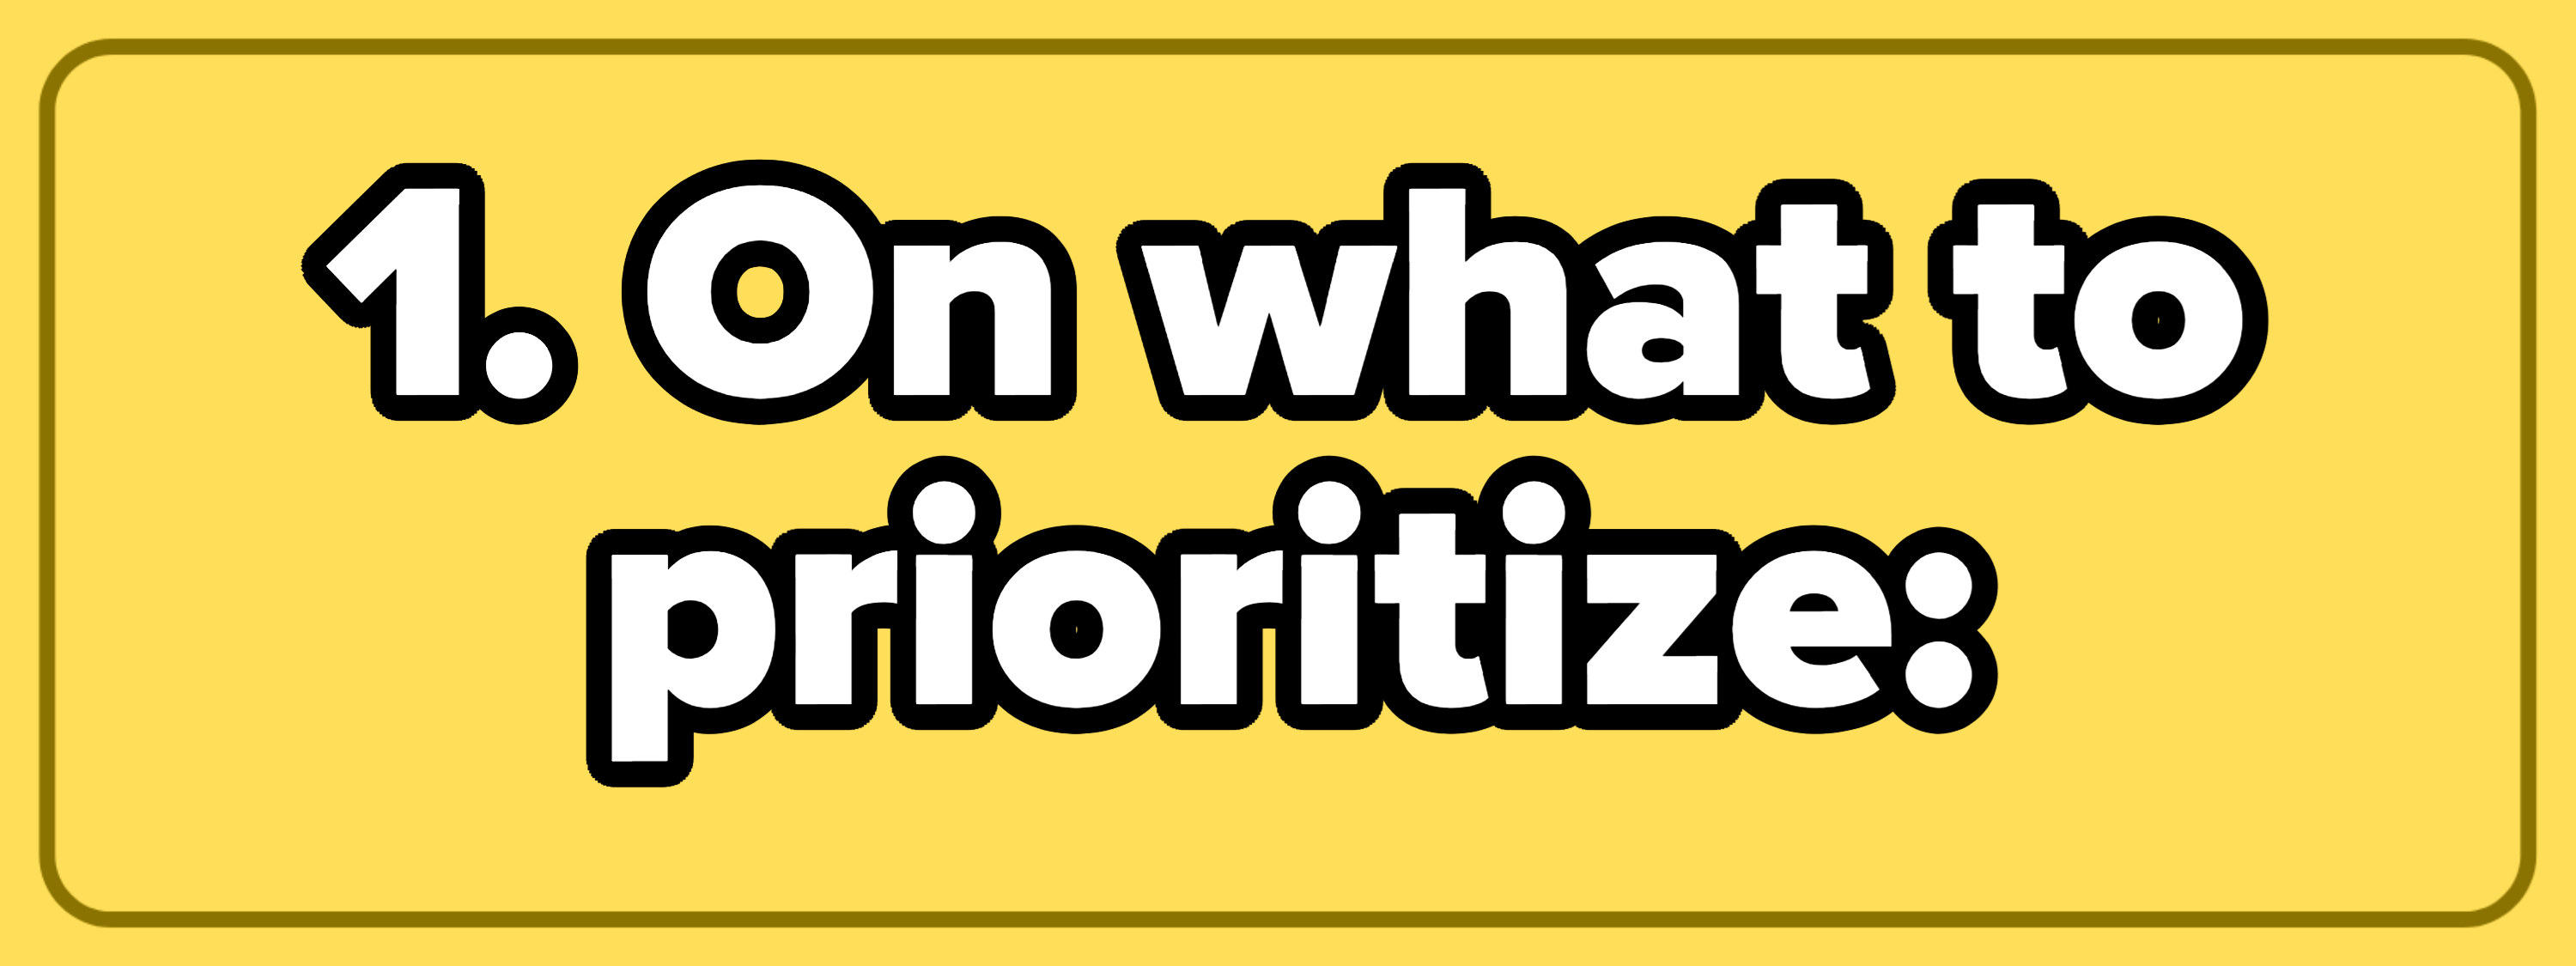 1. On what to prioritize: